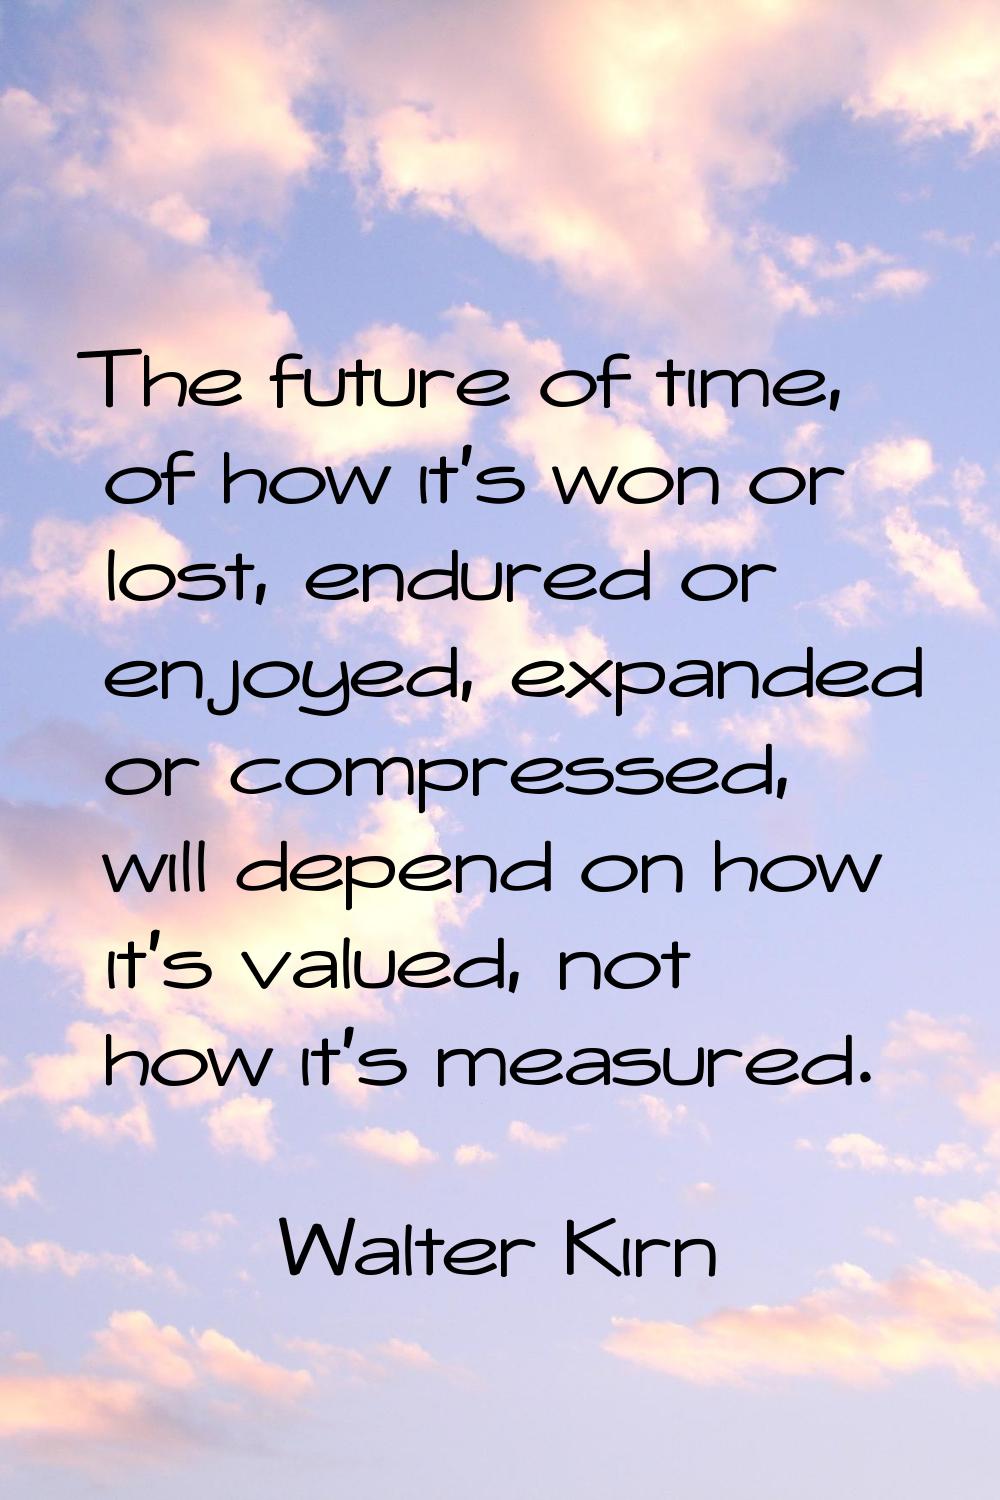 The future of time, of how it's won or lost, endured or enjoyed, expanded or compressed, will depen